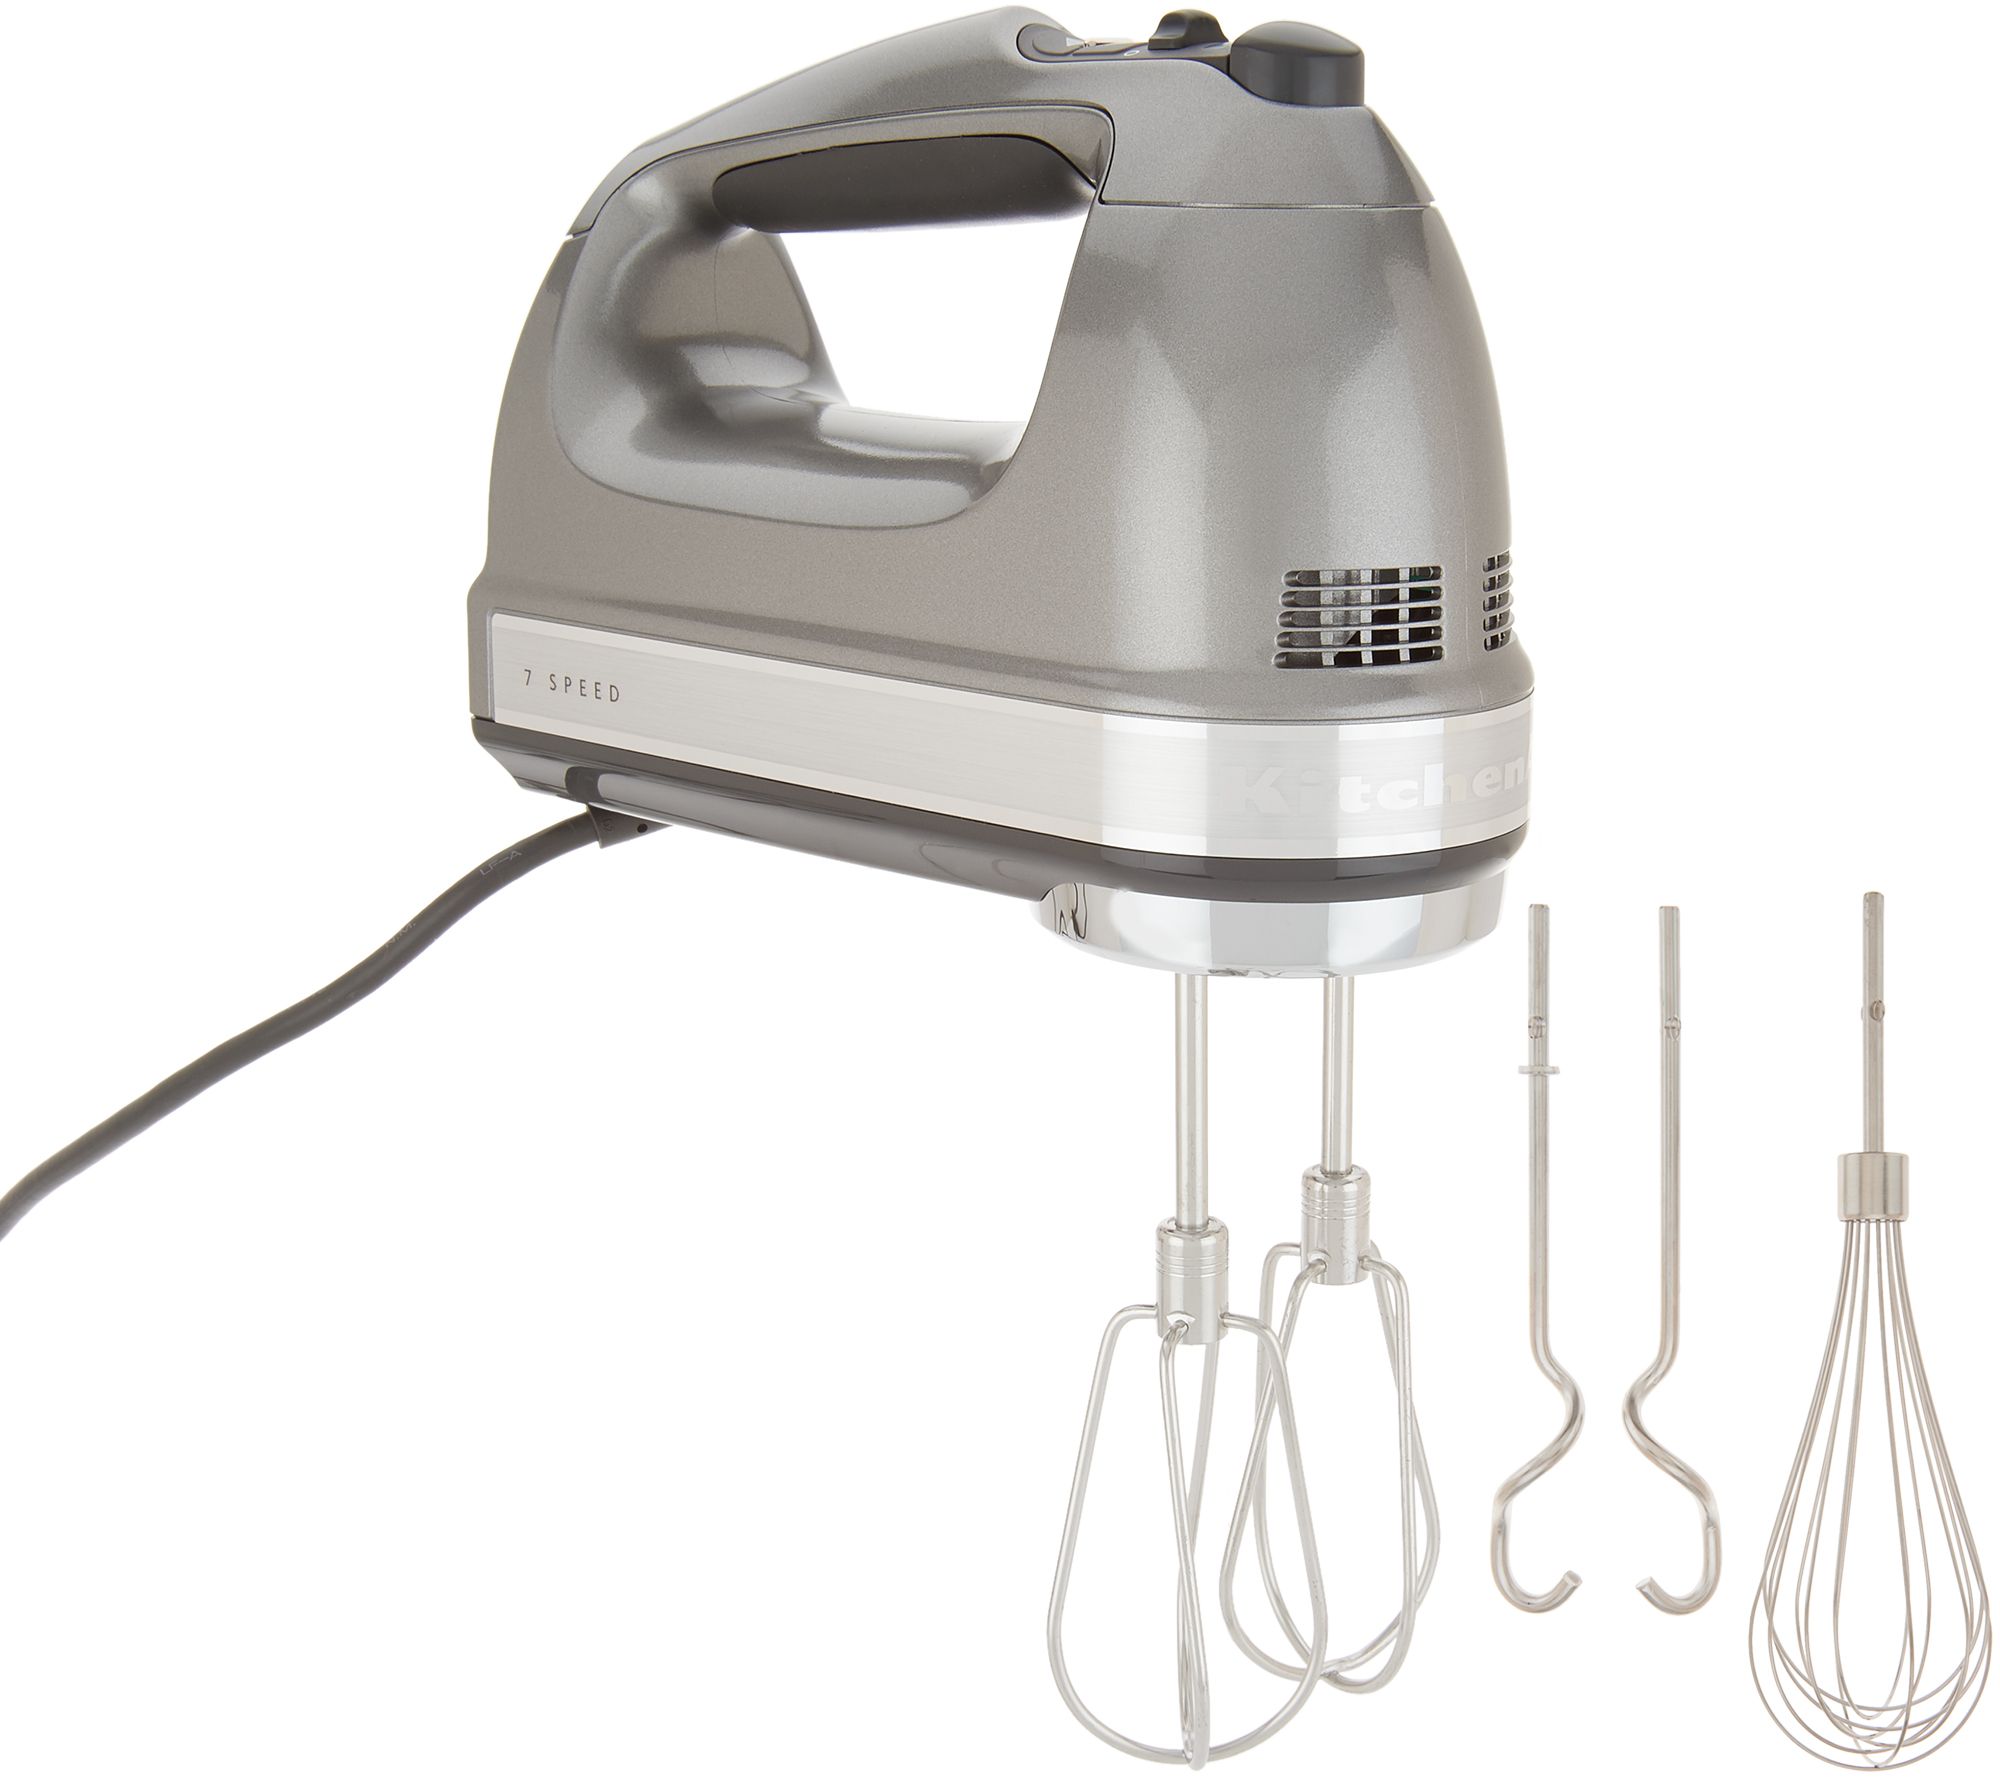 Delish by DASH Compact Stand Mixer, 3.5 Quart with Beaters & Dough